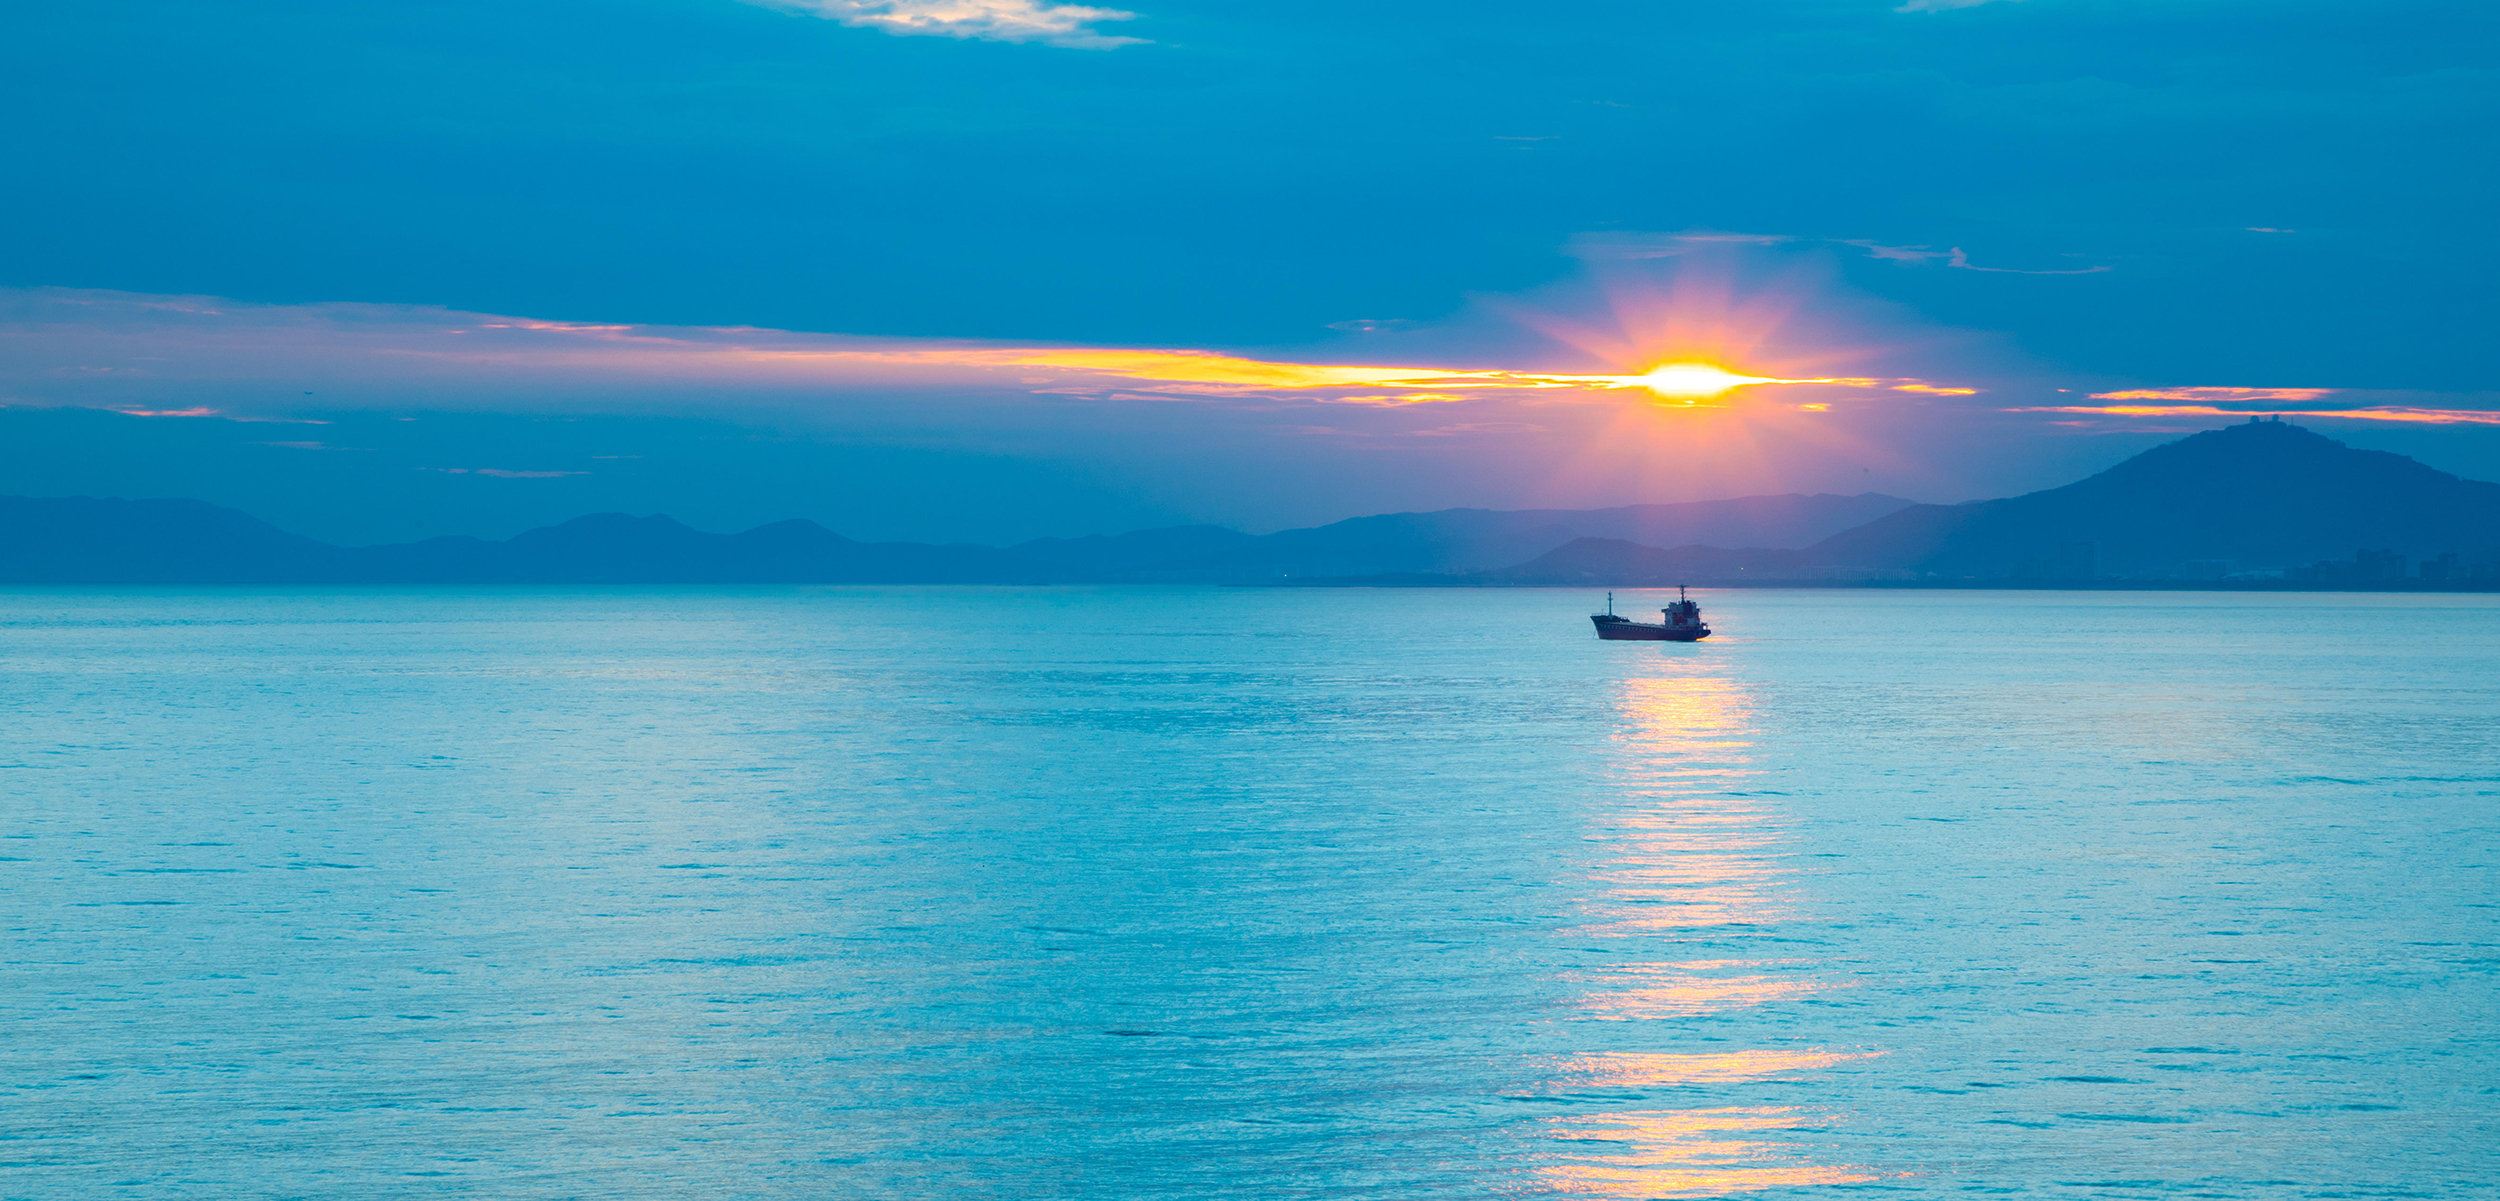 A little boat sitting on the horizon of light blue water with the sun setting behind